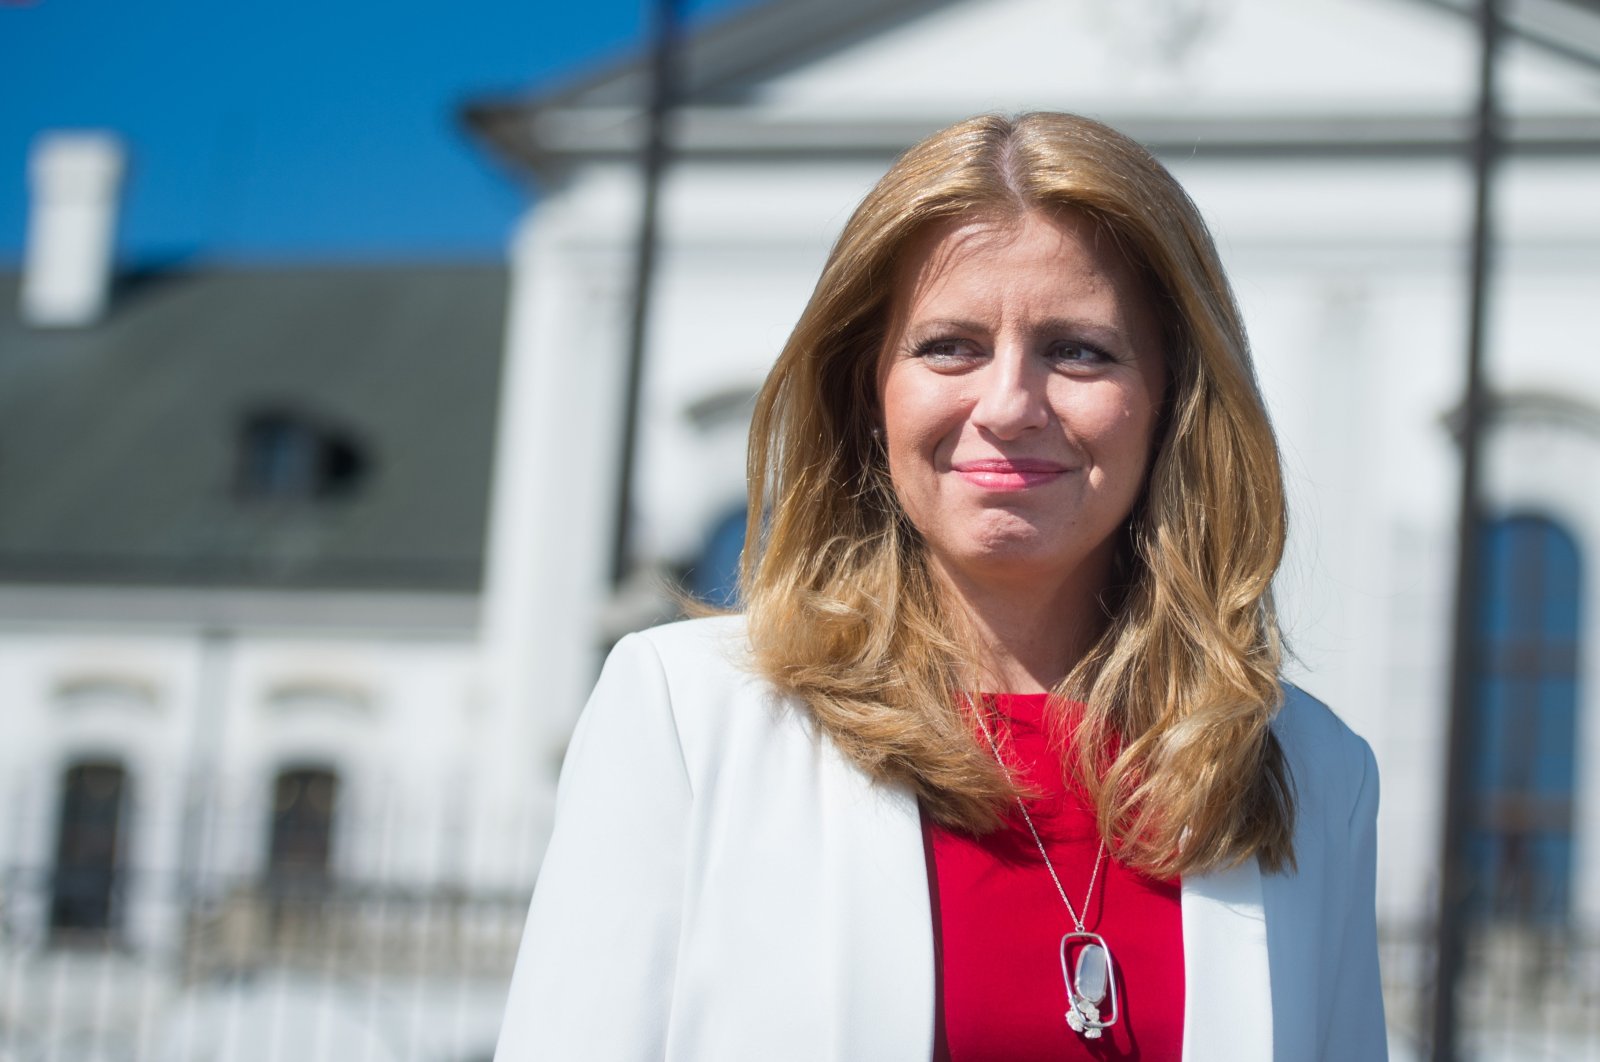 Newly elected Slovak President Zuzana Caputova speaks to a journalist in front of the Presidential Palace in Bratislava, Slovakia, March 31, 2019. (AFP Photo)